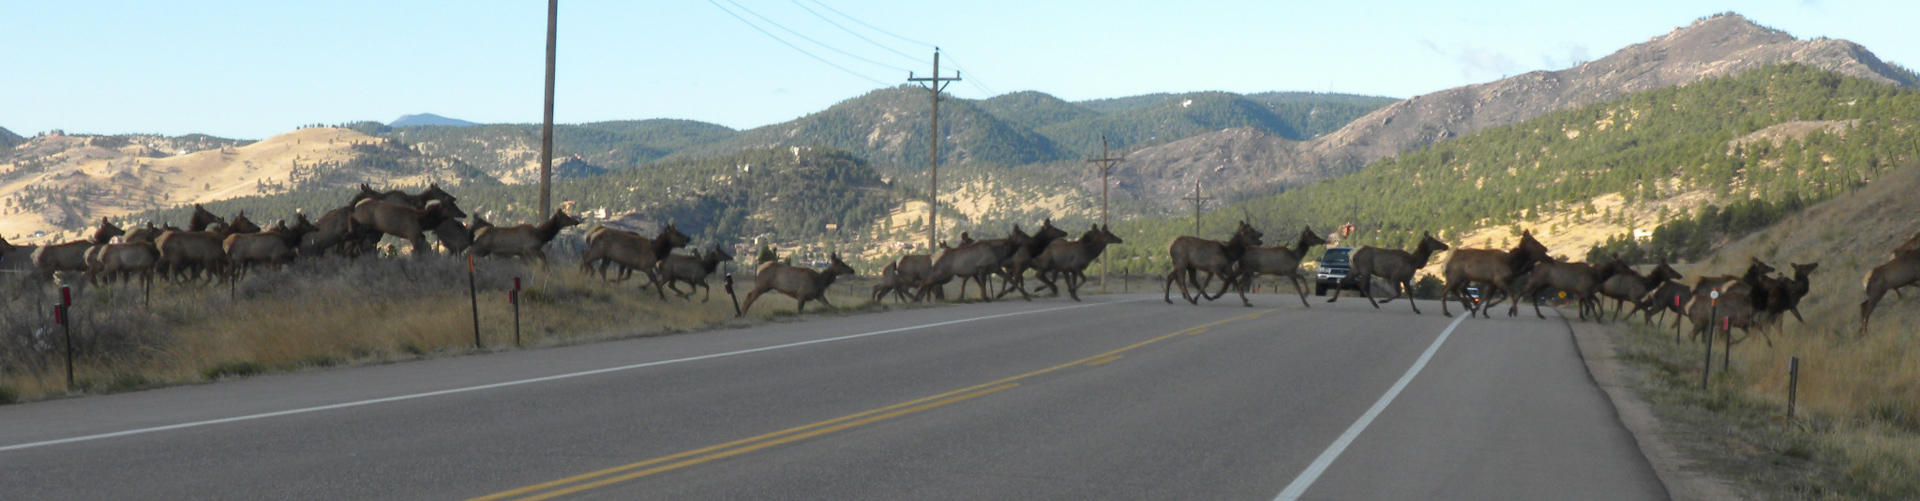 A large group of elk cross US 36 with cars stopped on the highway